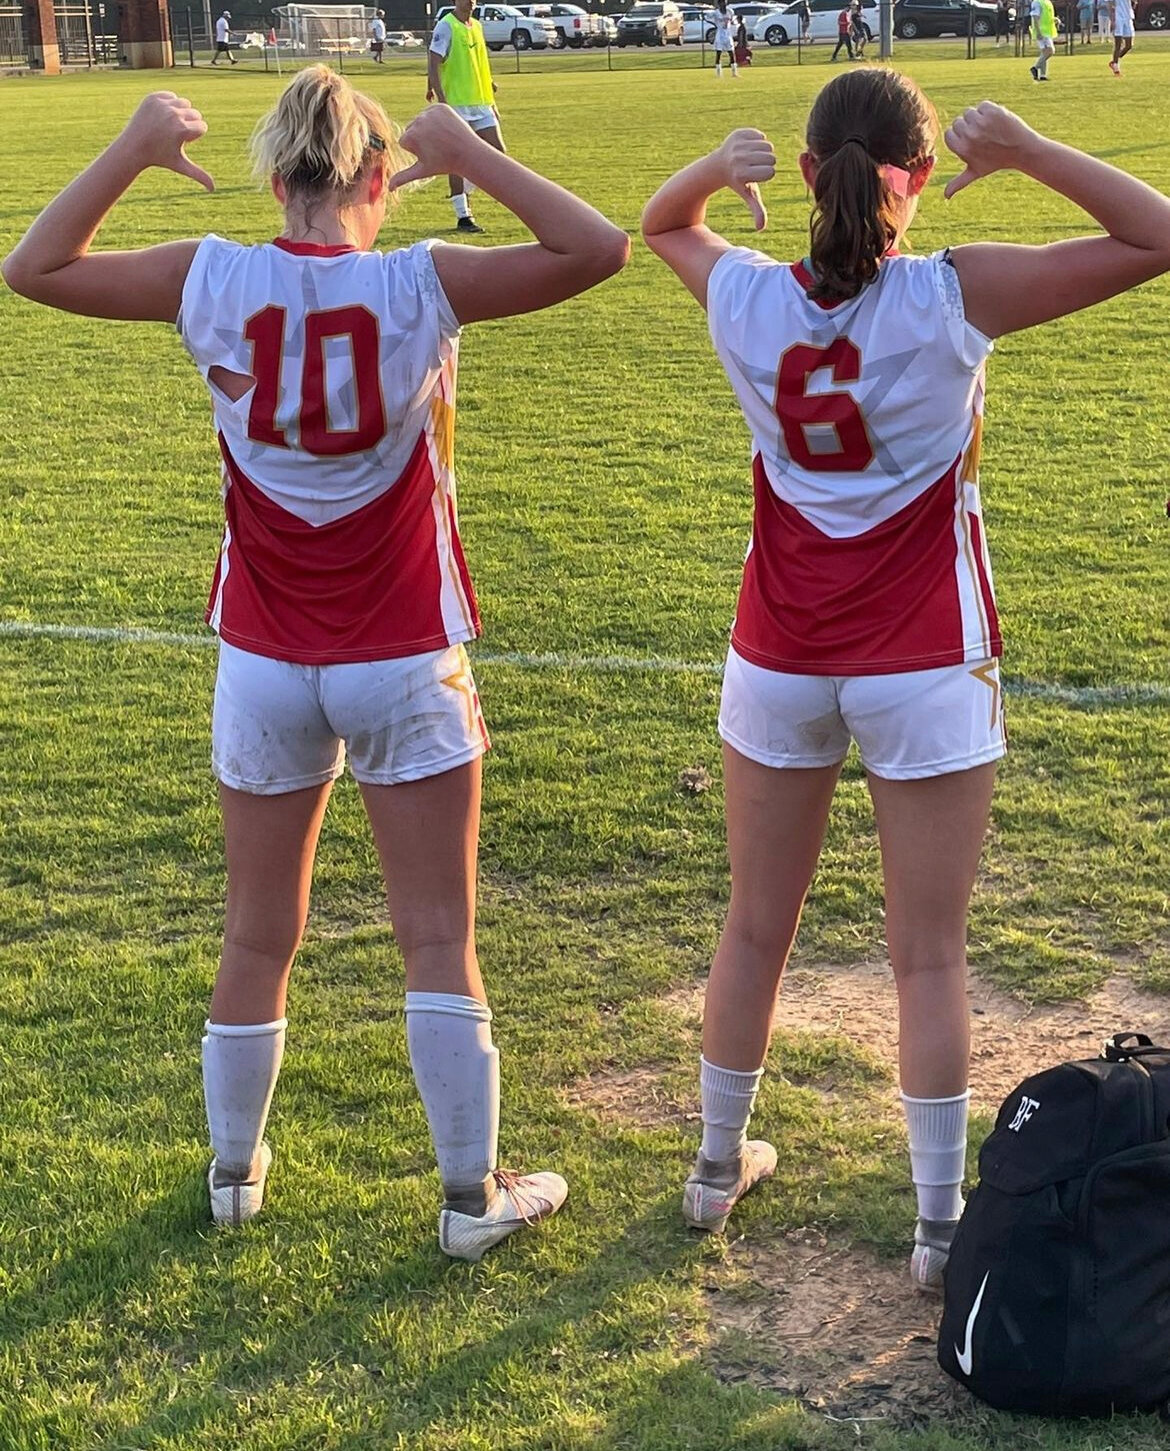 Foley’s Allie Fussell (10) and Robertsdale’s Emily Smith (6) show off their All-Star threads after the North-South soccer classic in Montgomery on Wednesday, July 19. The pair both play club soccer for Baldwin Rush.